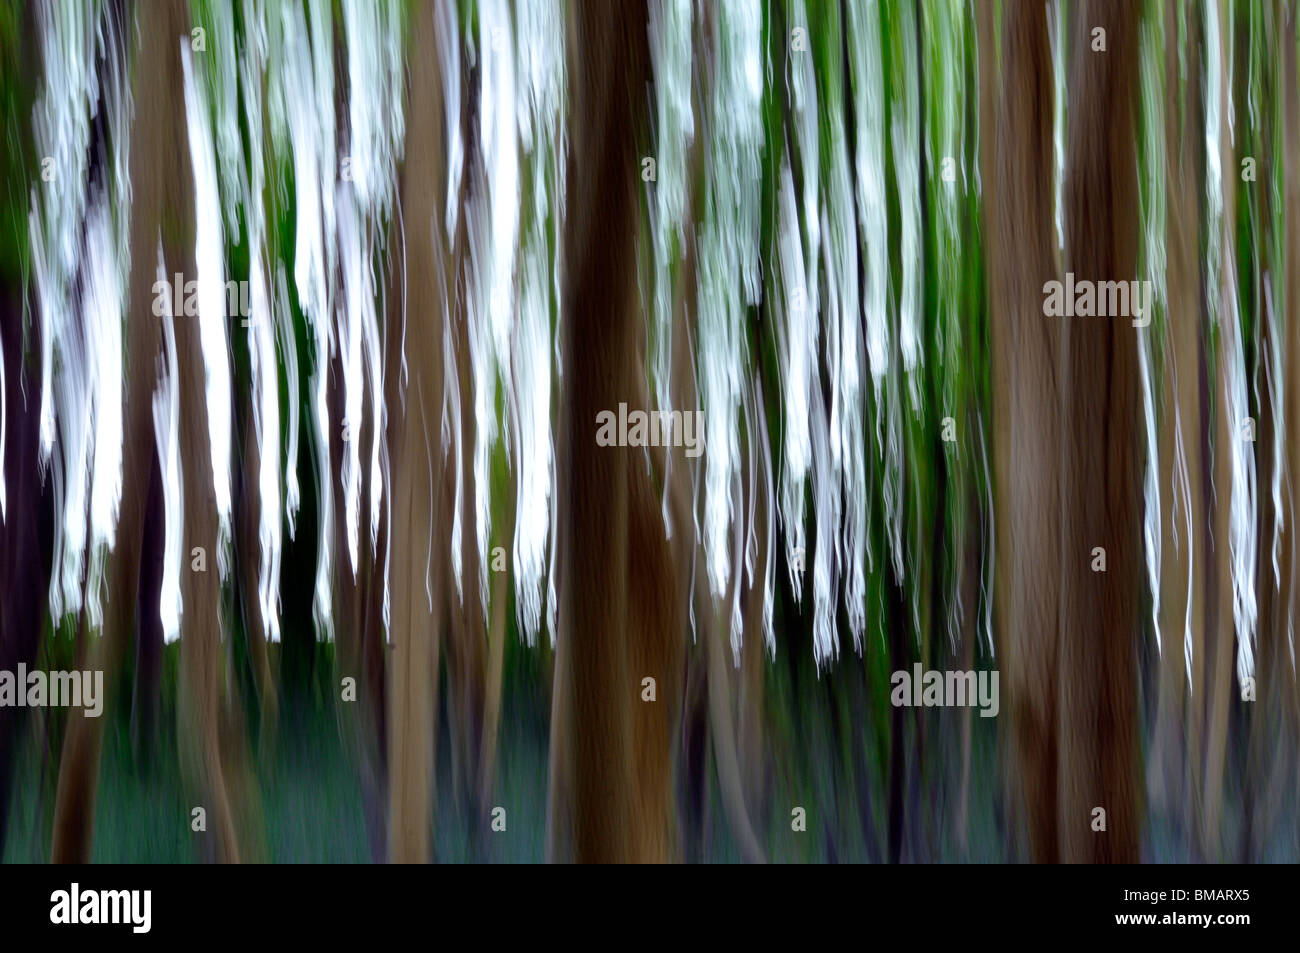 abstract impressionist view of bluebelle woods Stock Photo